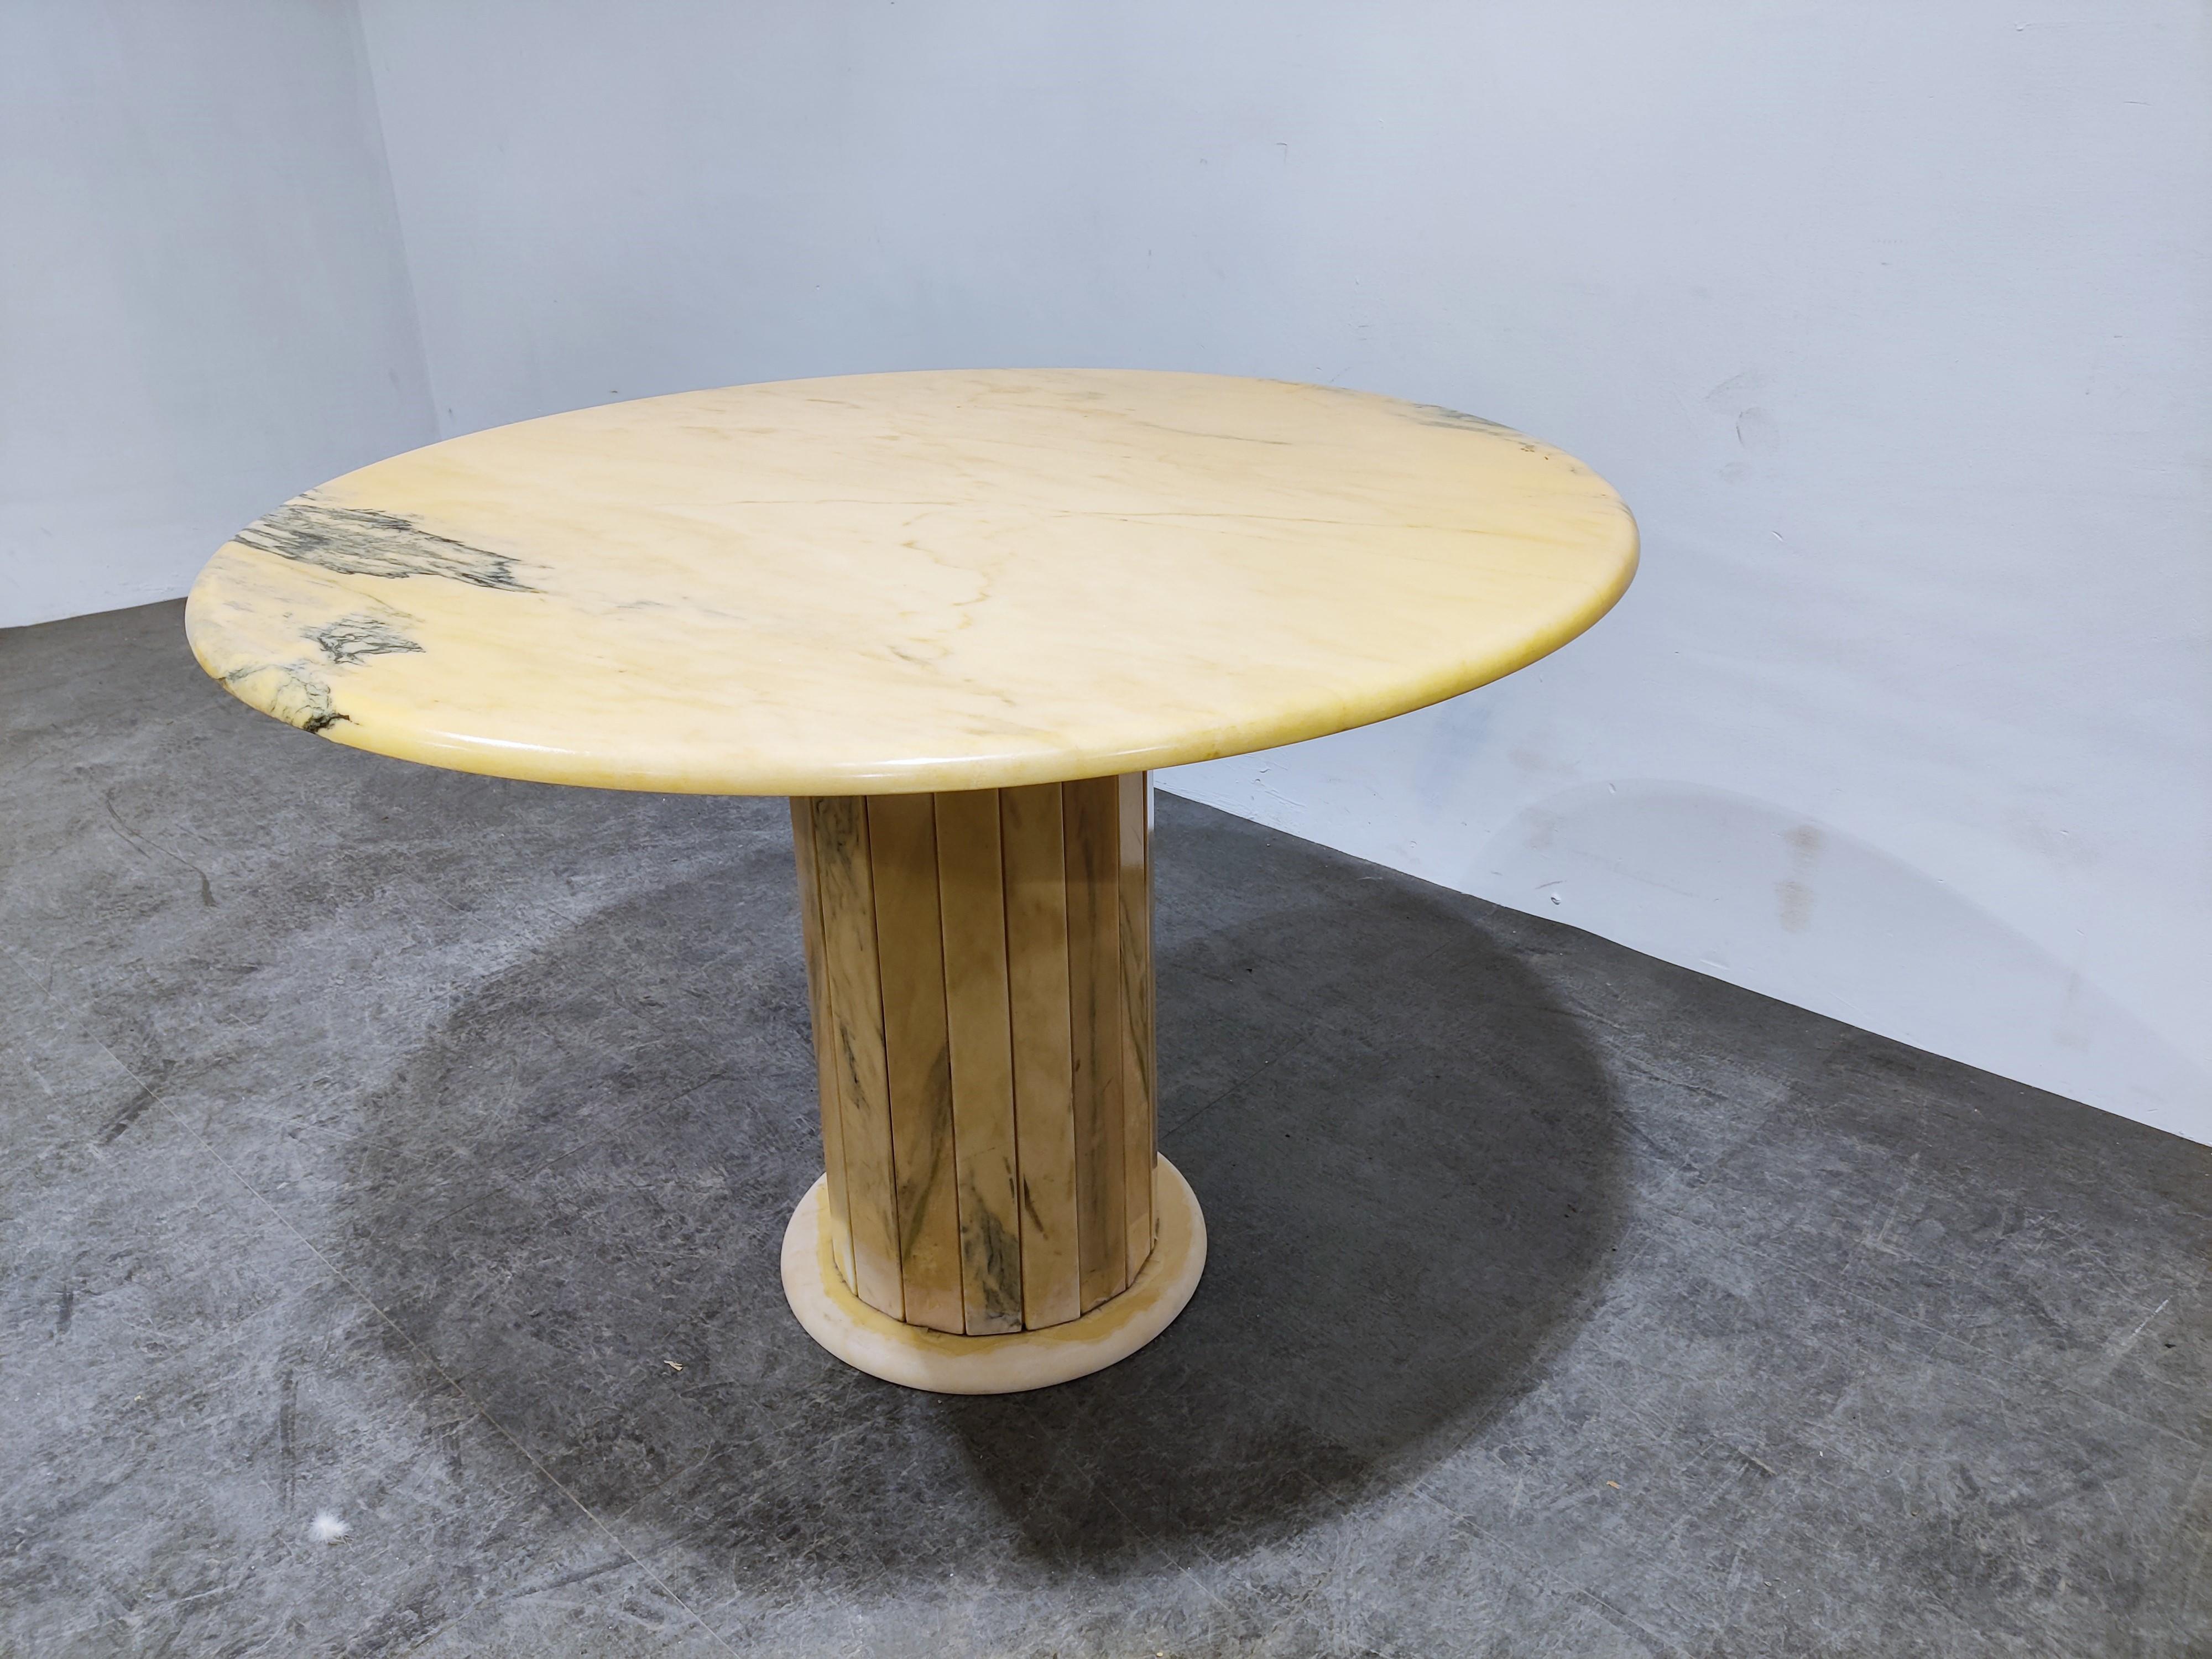 Elegant dining table made from pink/yellow-ish marble

Beautiful natural vaining.

The round top is sitting on cillindrical slatted marble base.

Good condition

1970s - Italy

Measures: Height: 75cm/29.52